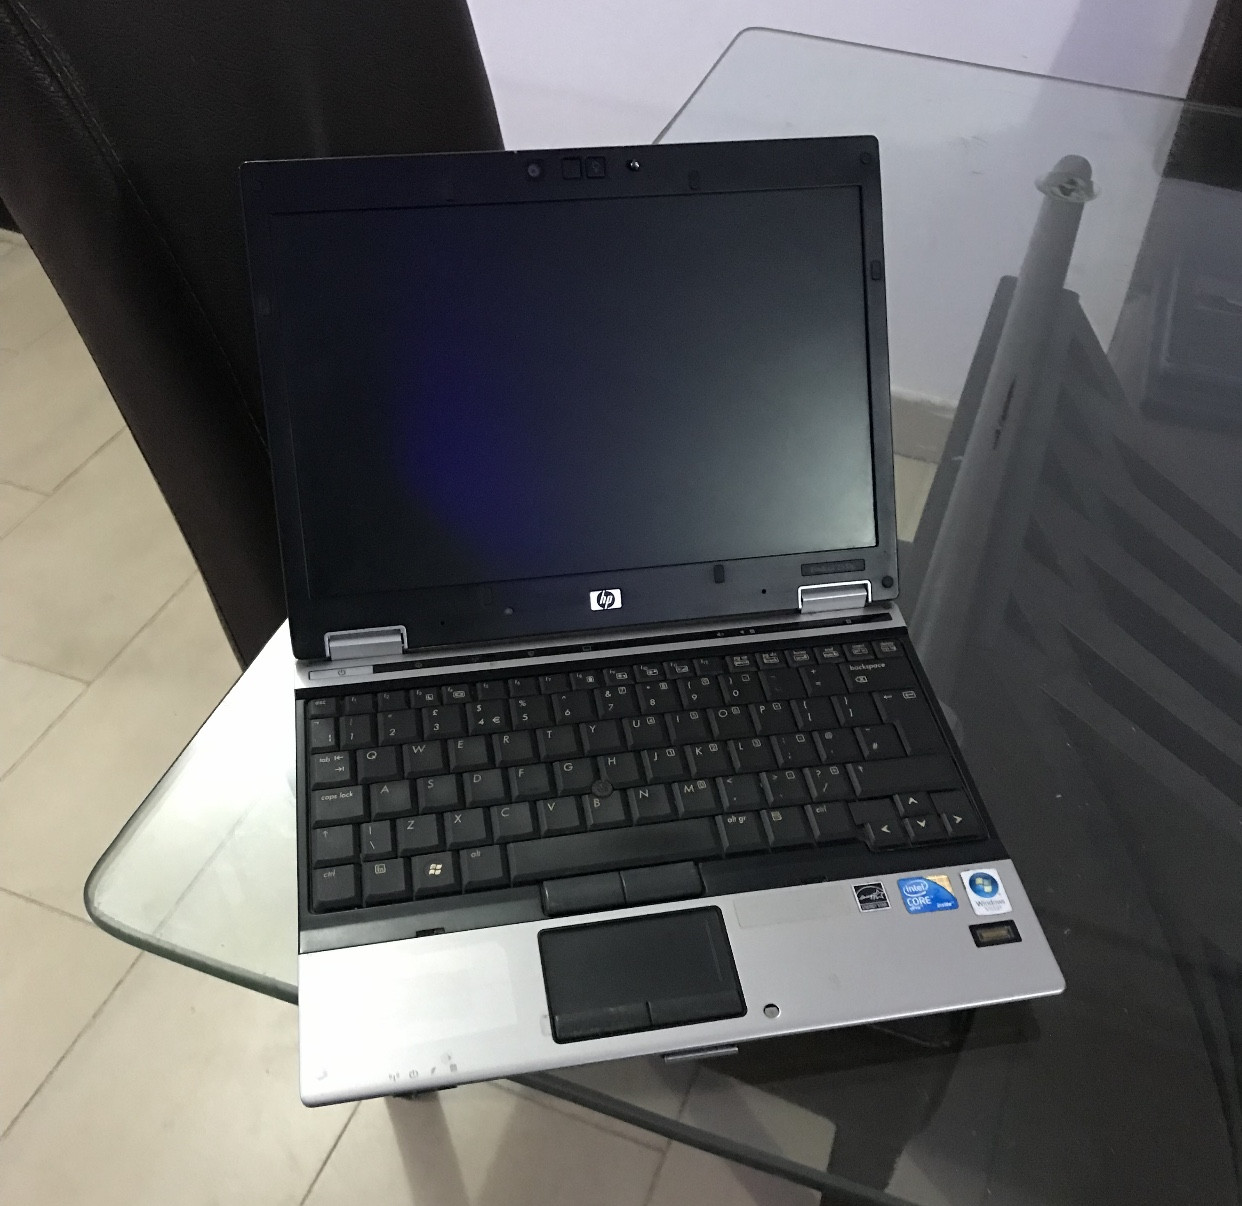 [K4]- Clean 2Gb Ram, 160Gb Hdd, 12inches, Cd Rom, Hp Elitebook 2530p Laptop #For_Sale